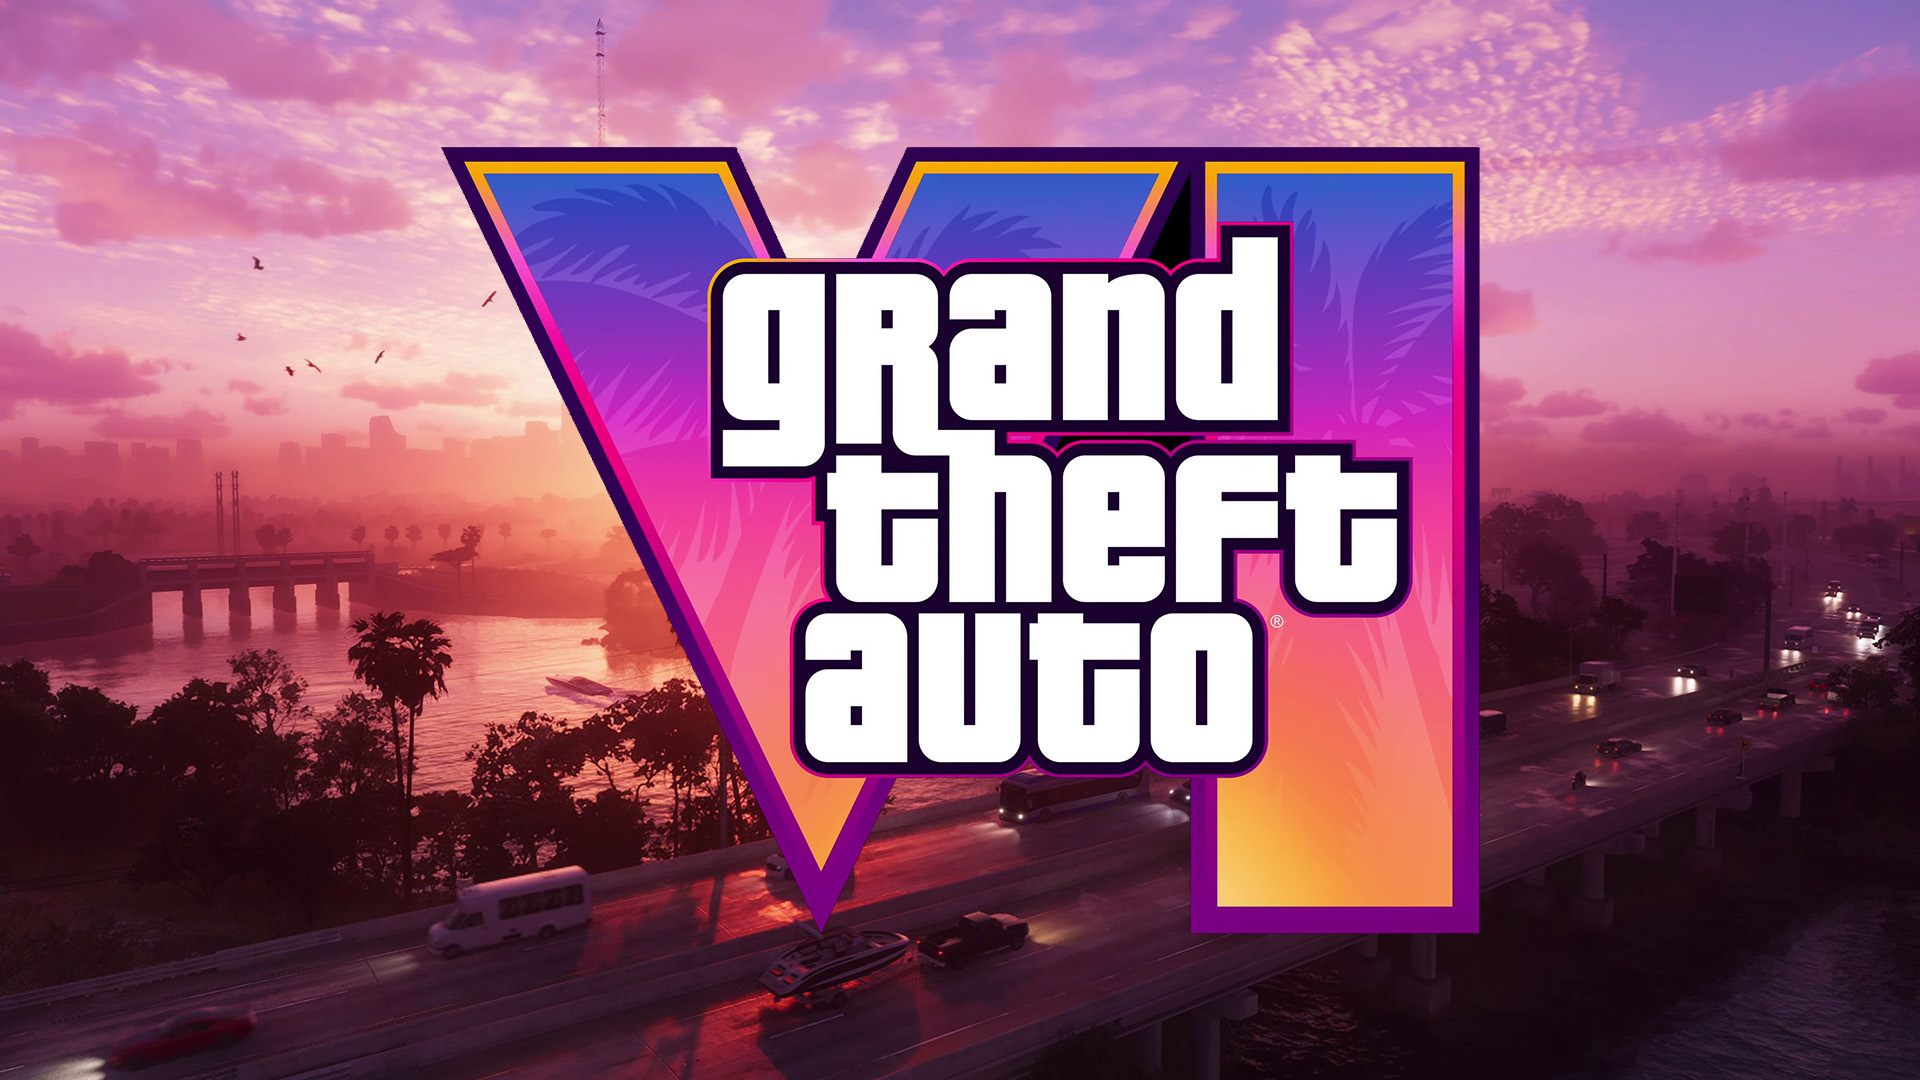 GTA 6 Trailer Leaks a Day Earlier Than Expected [Update]